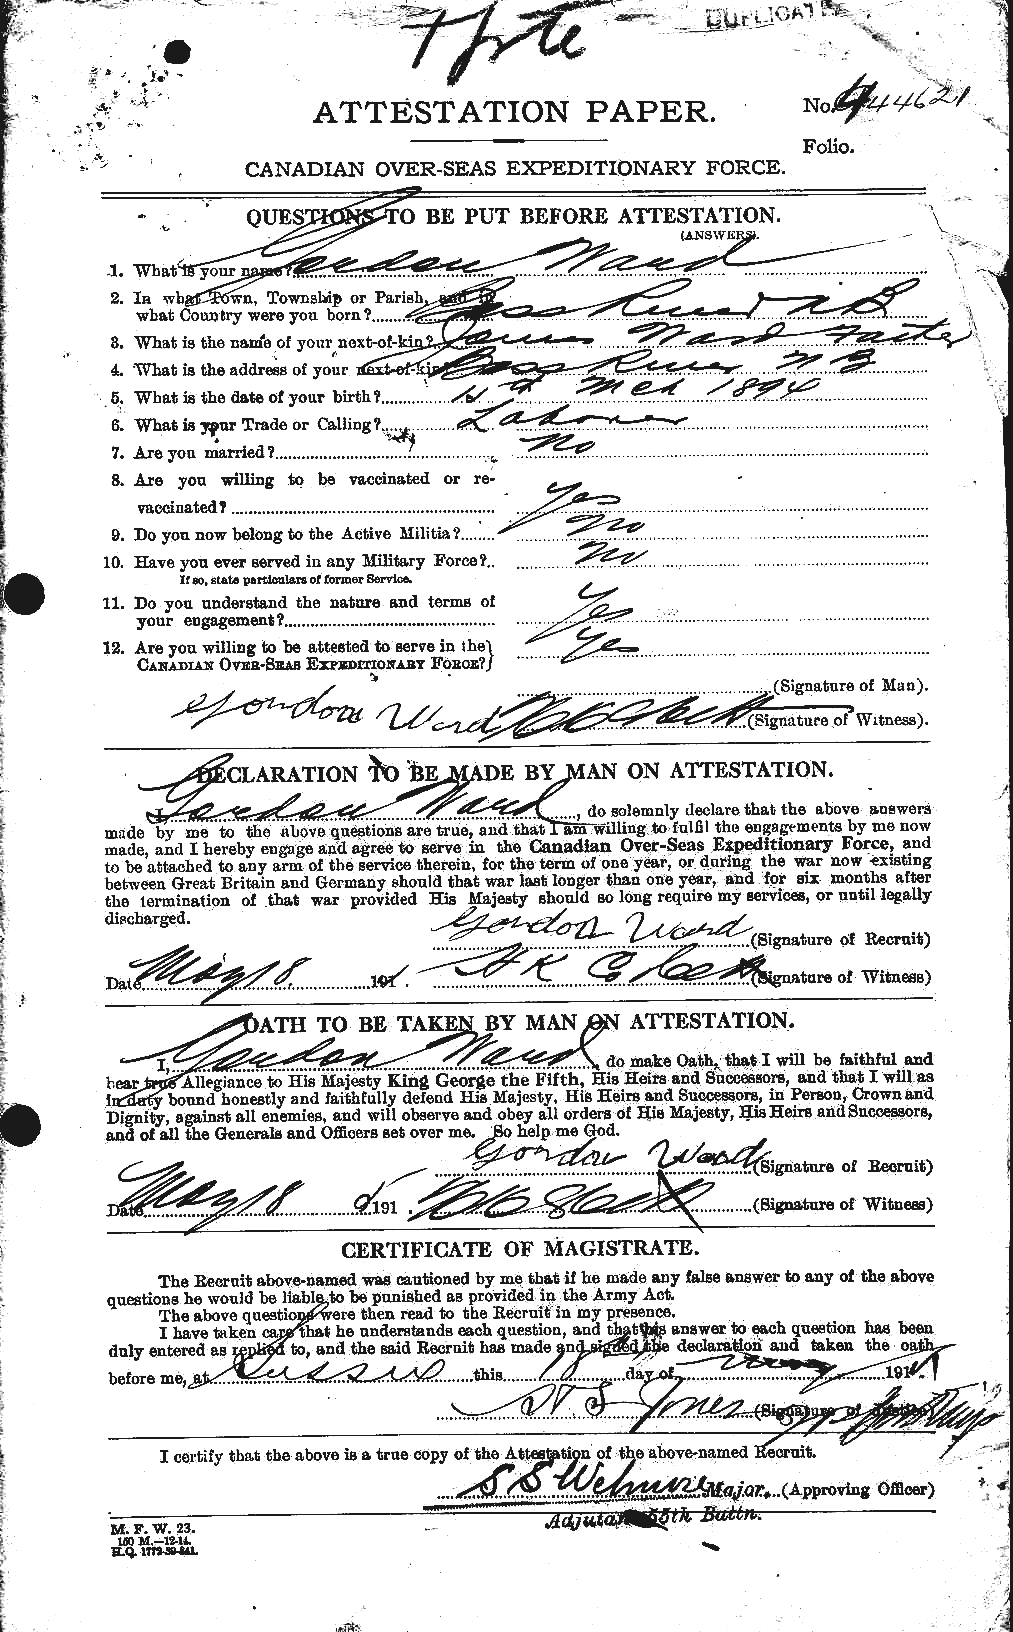 Personnel Records of the First World War - CEF 657787a